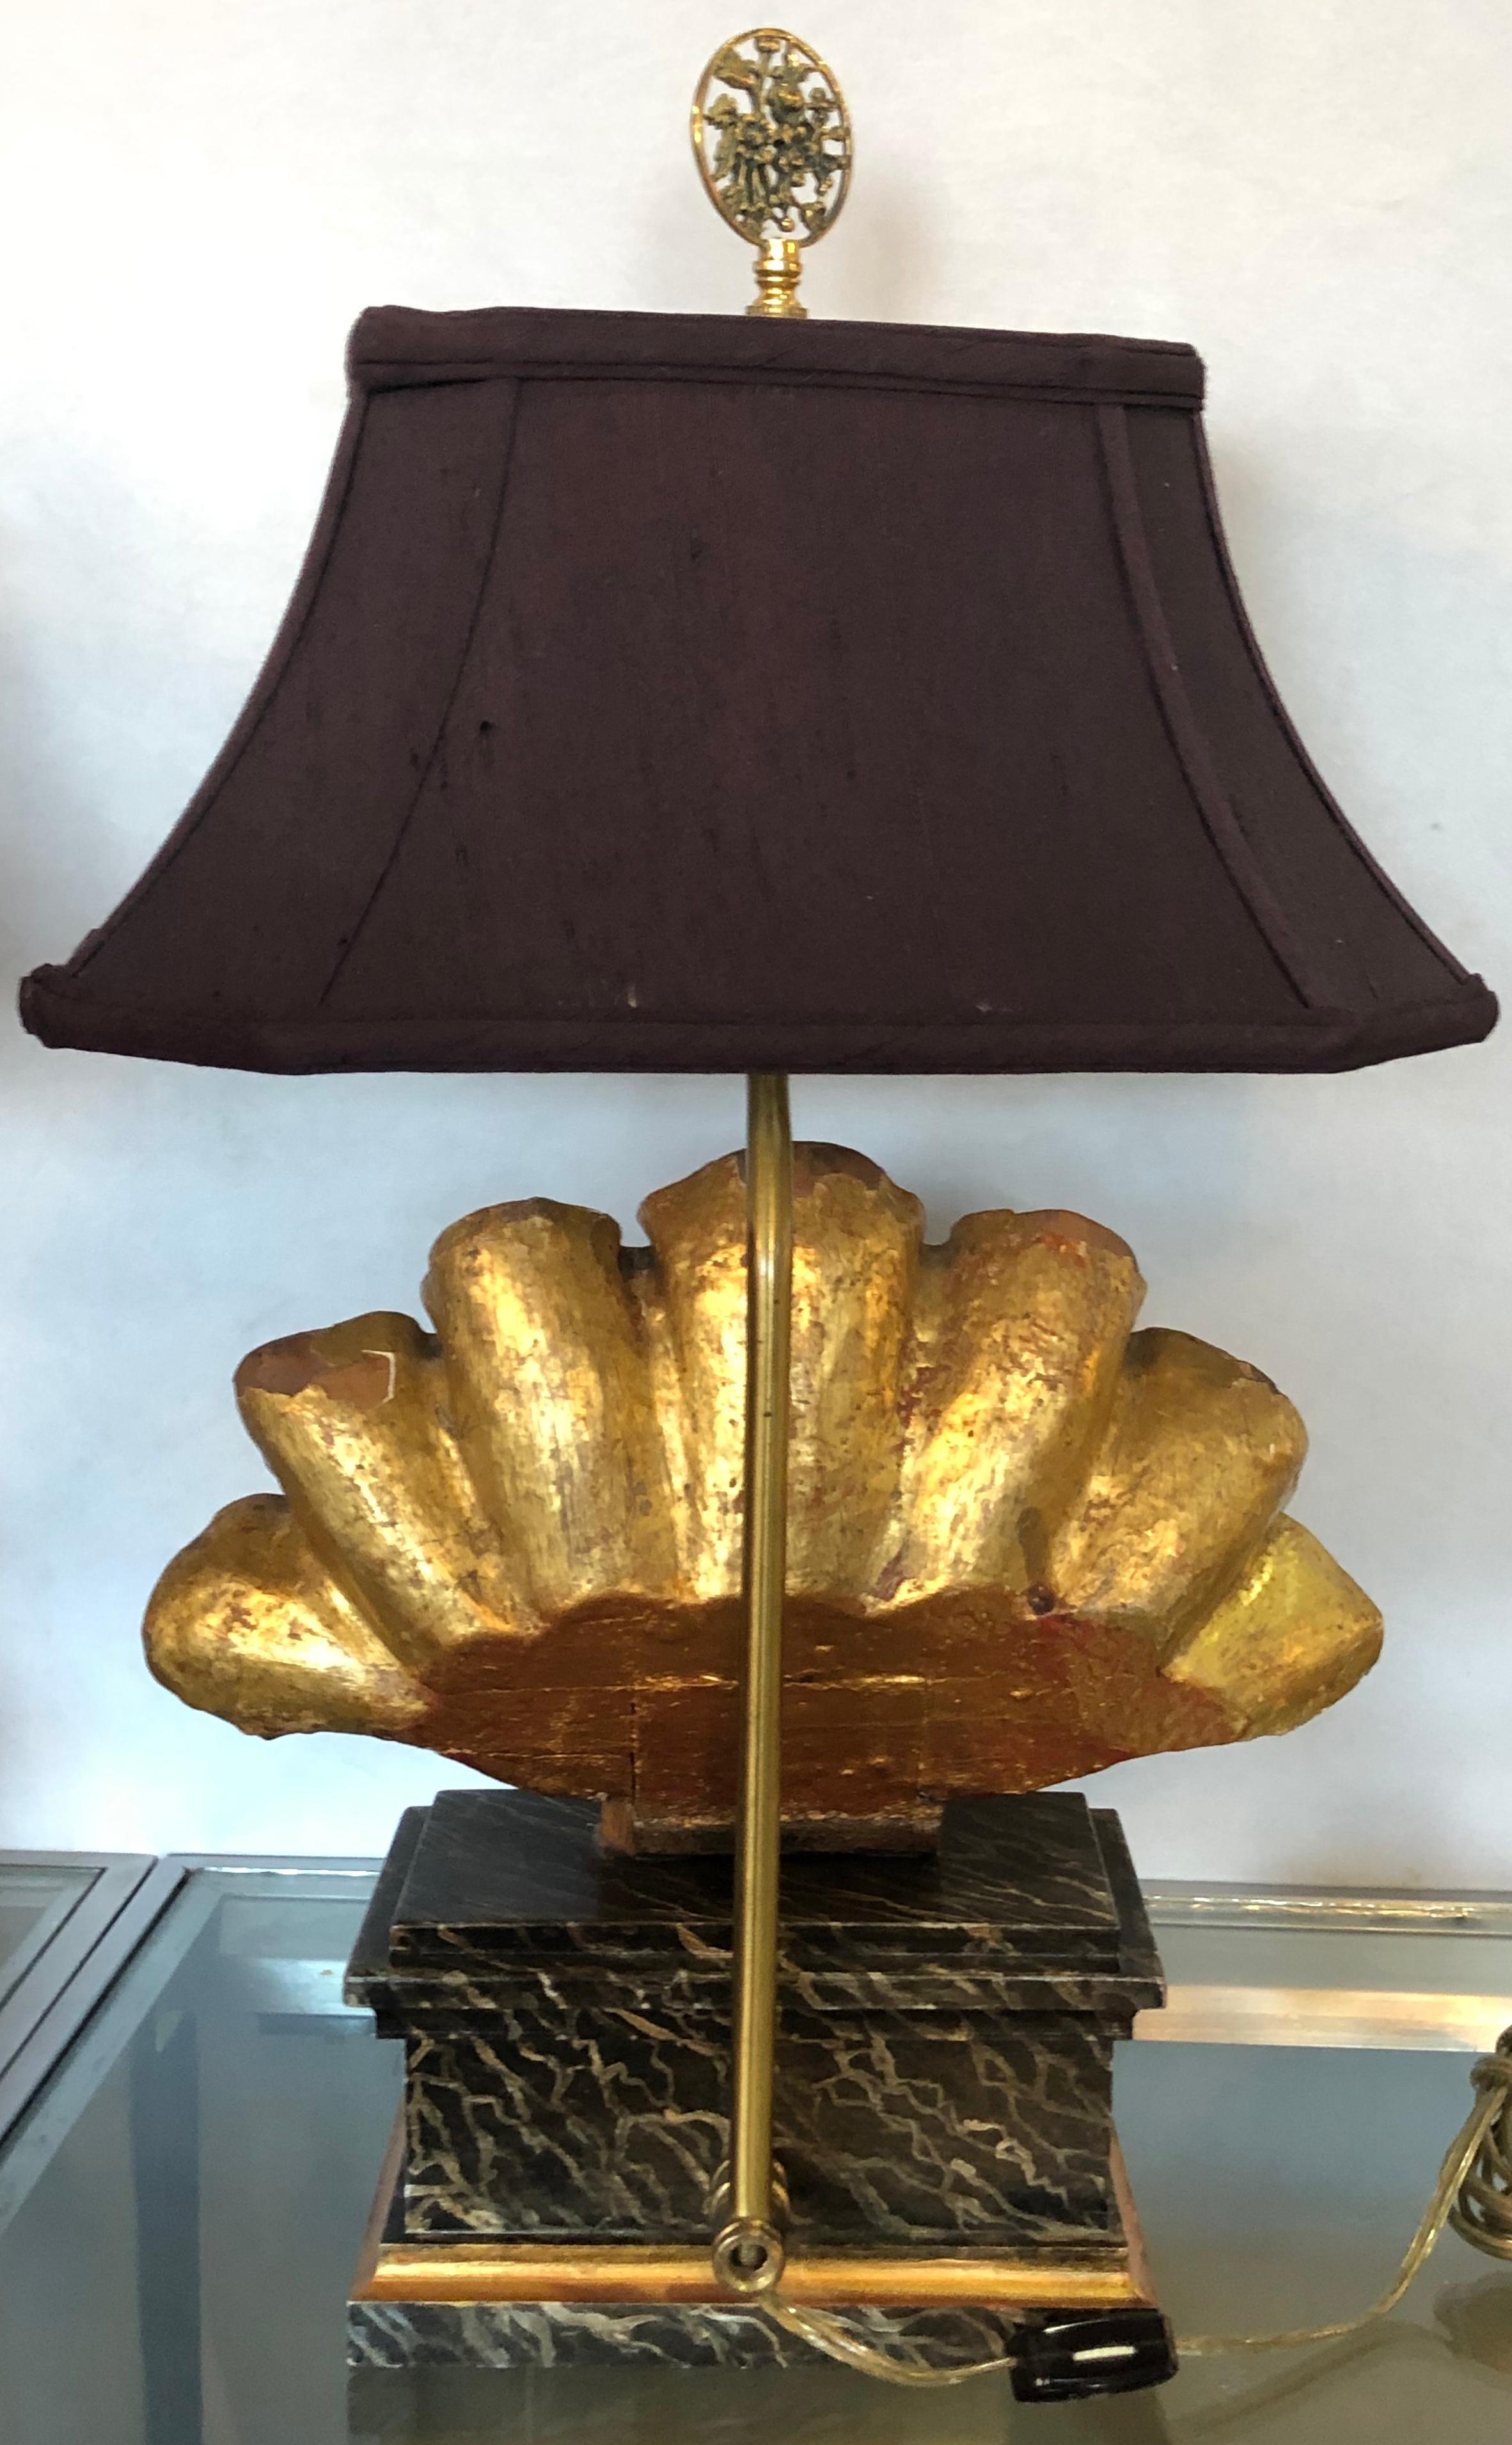 Pair of Hollywood Regency Shell Carved Gilt & Faux Marble Decorated Table Lamps (Italienisch)